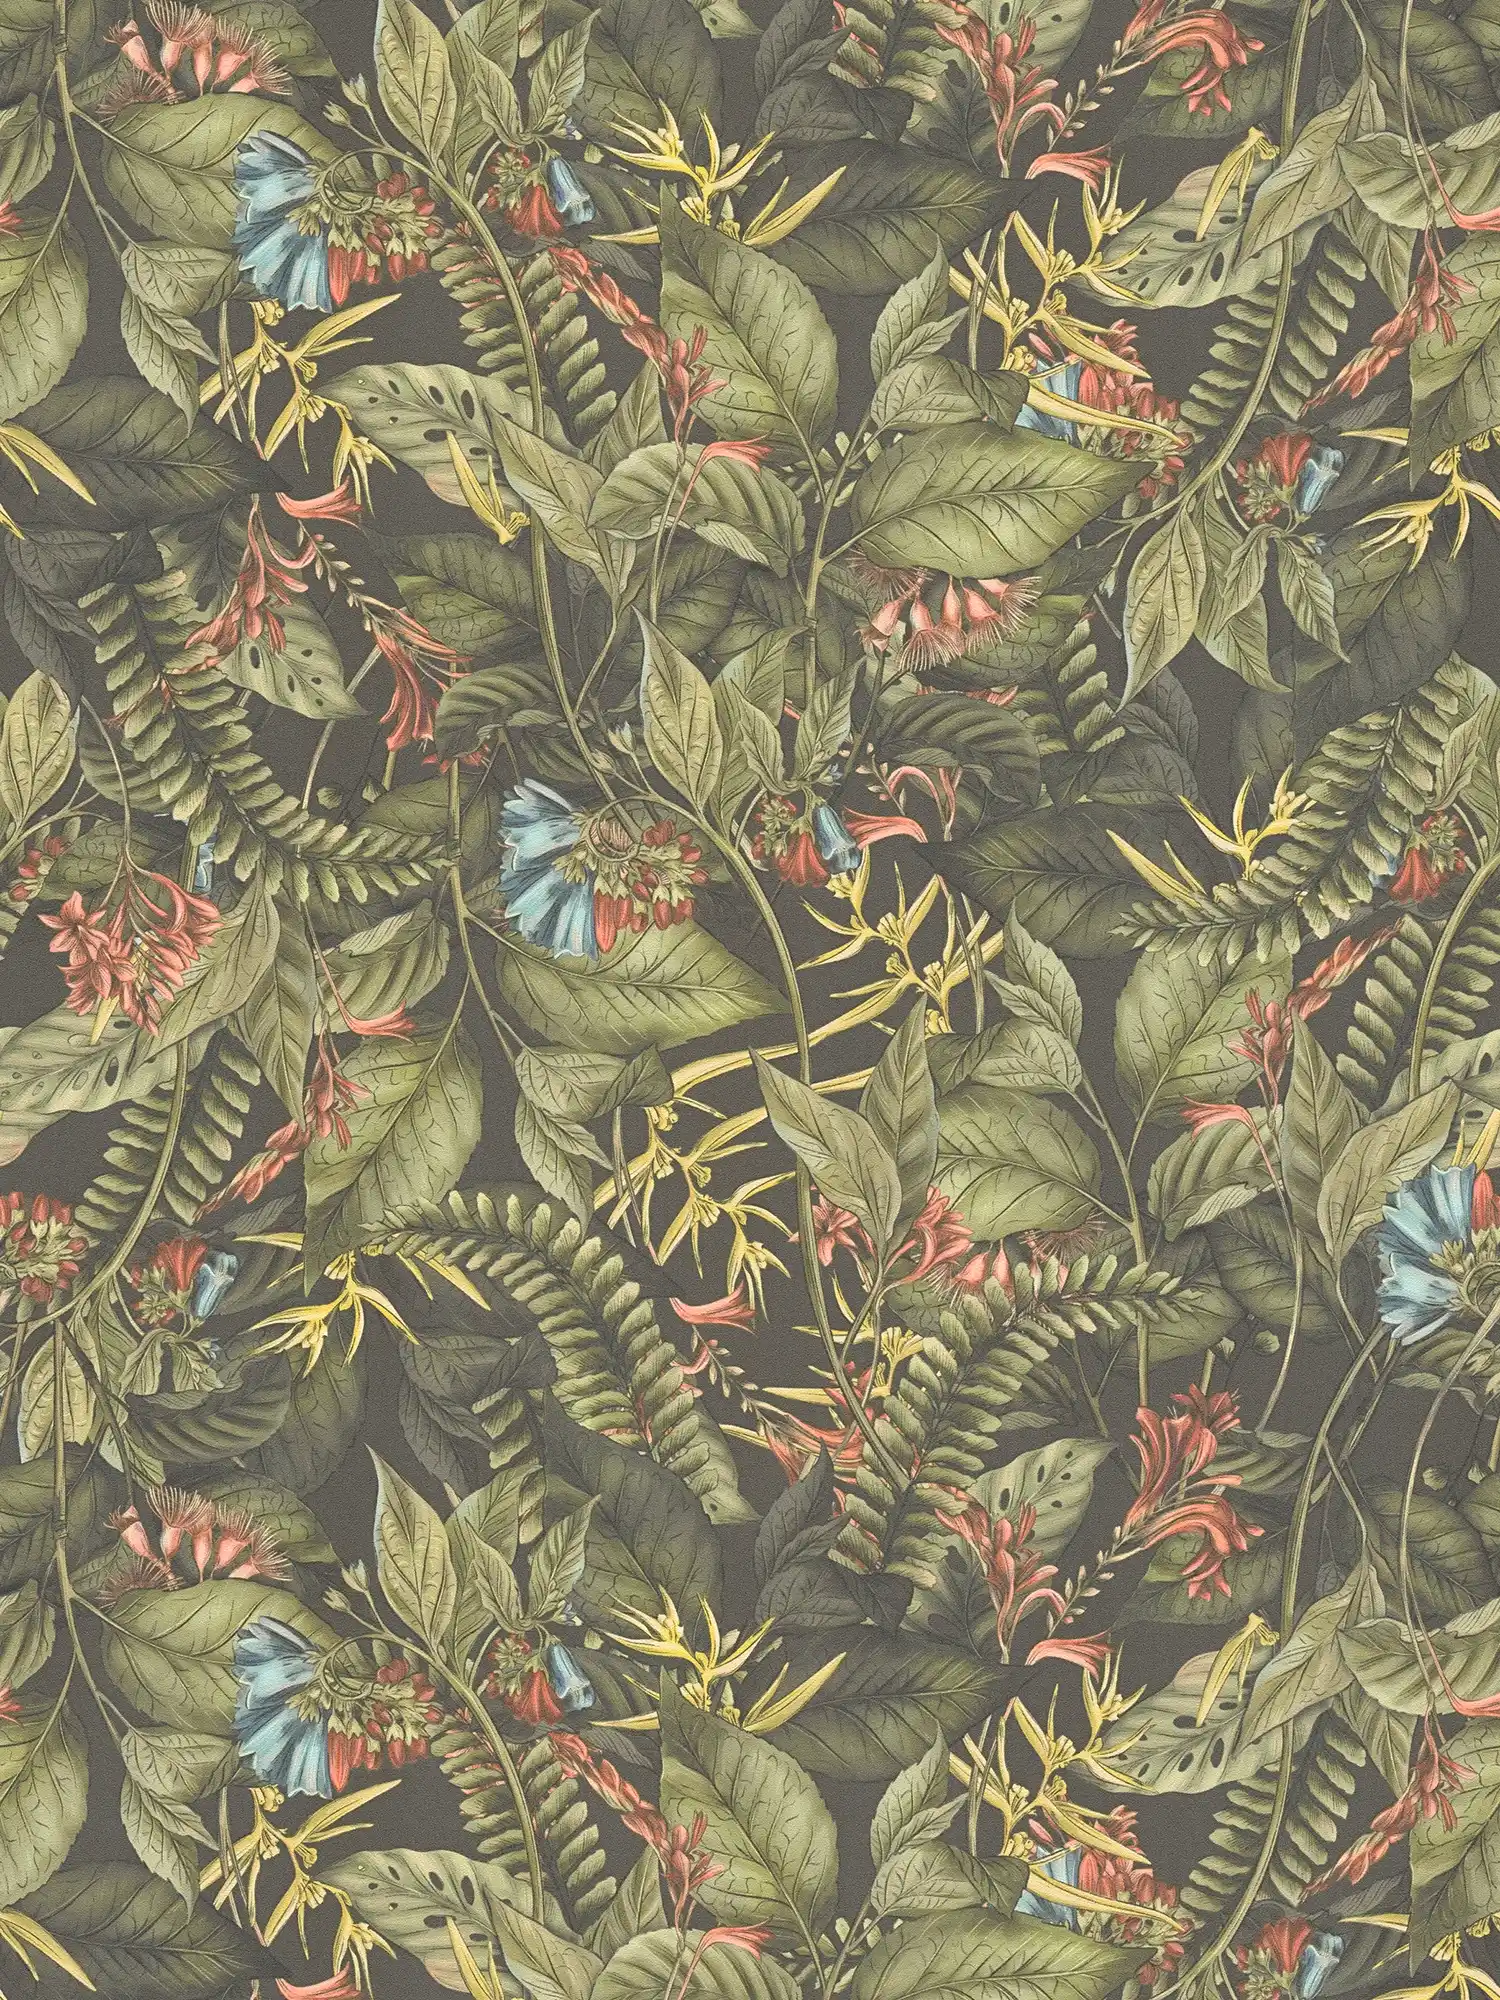 Wallpaper with leaves & flowers in floral style textured matt - green, dark green, red
